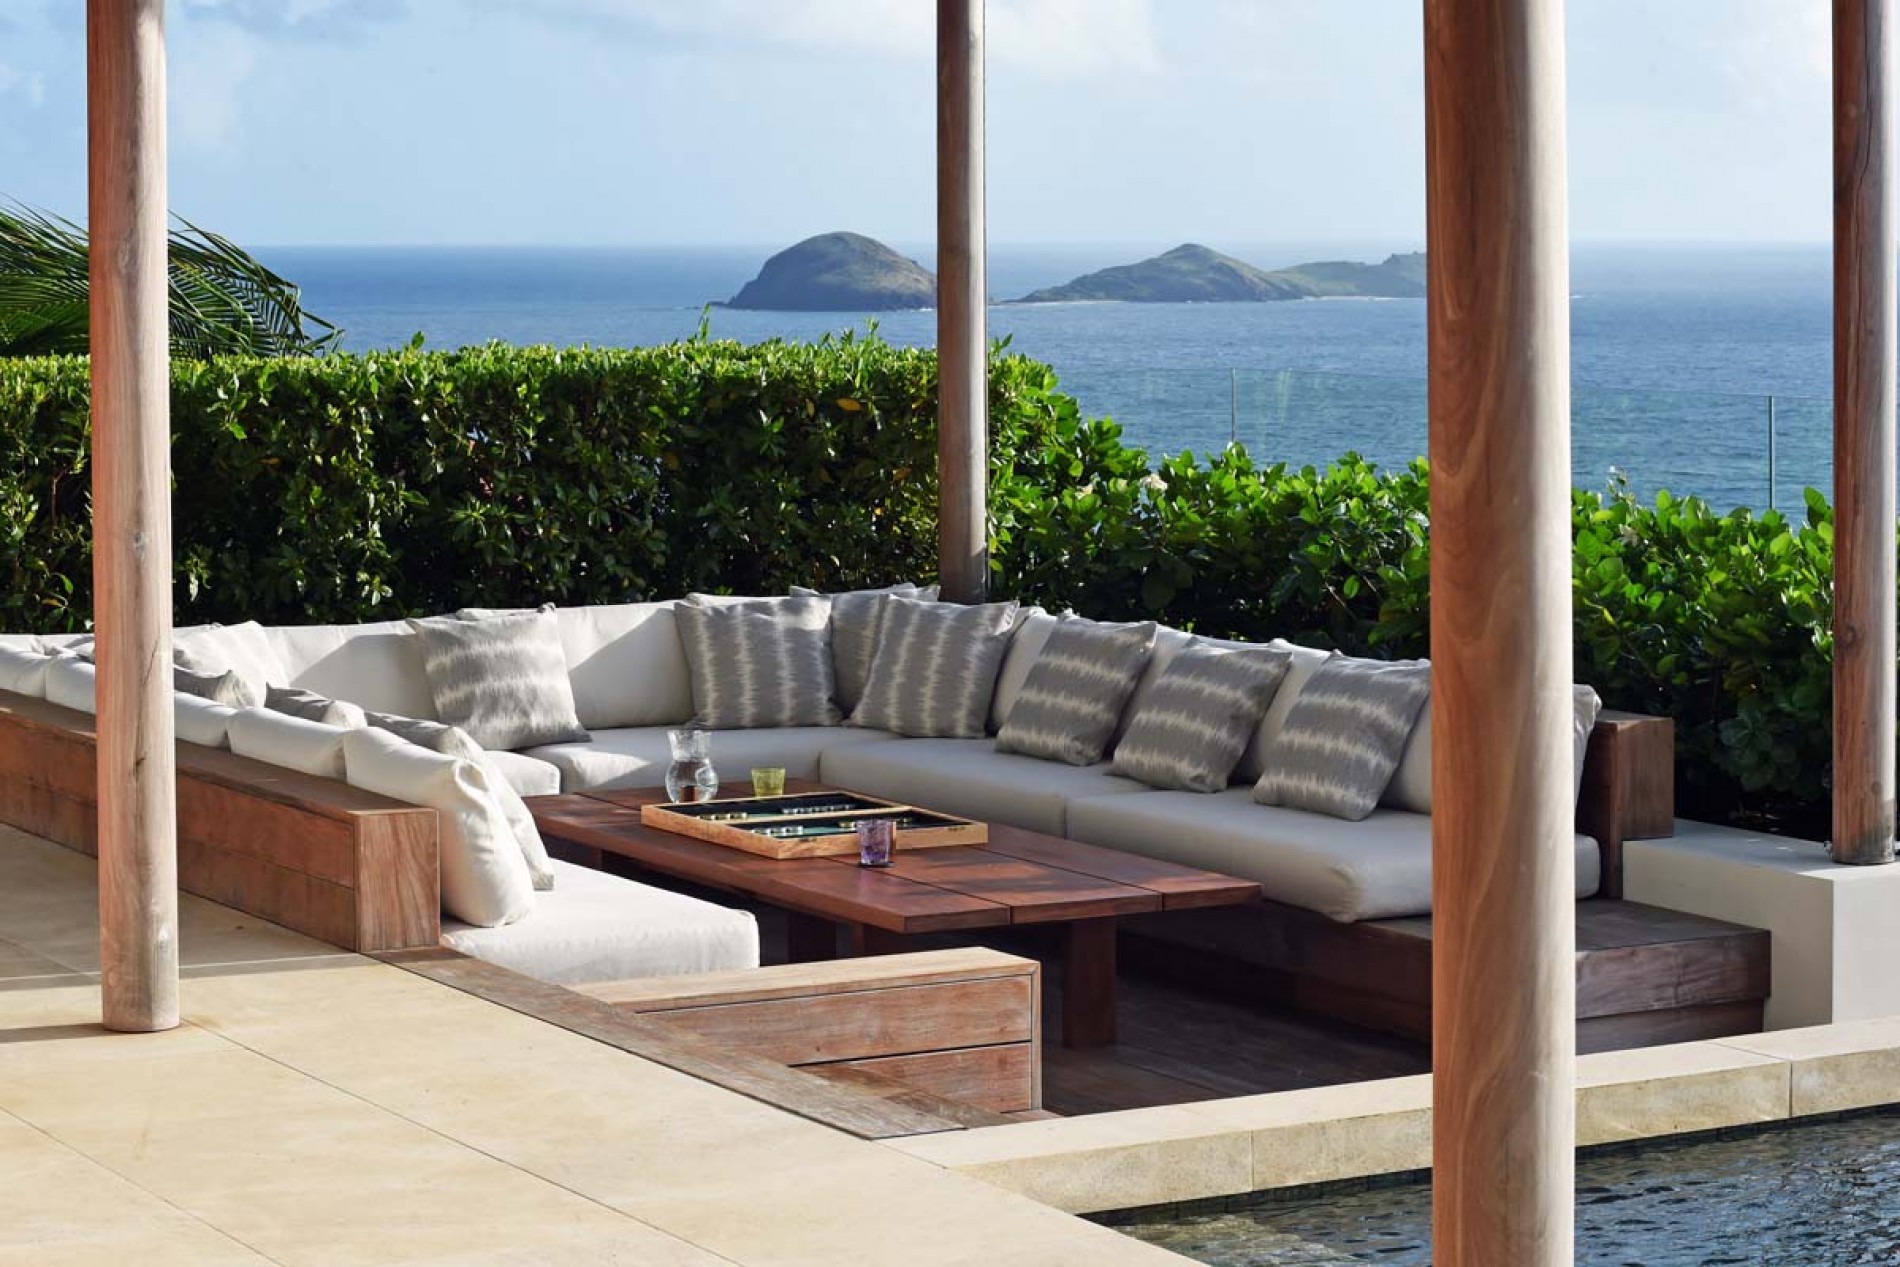 Ligne St Barth - Let's welcome September with a picture of our